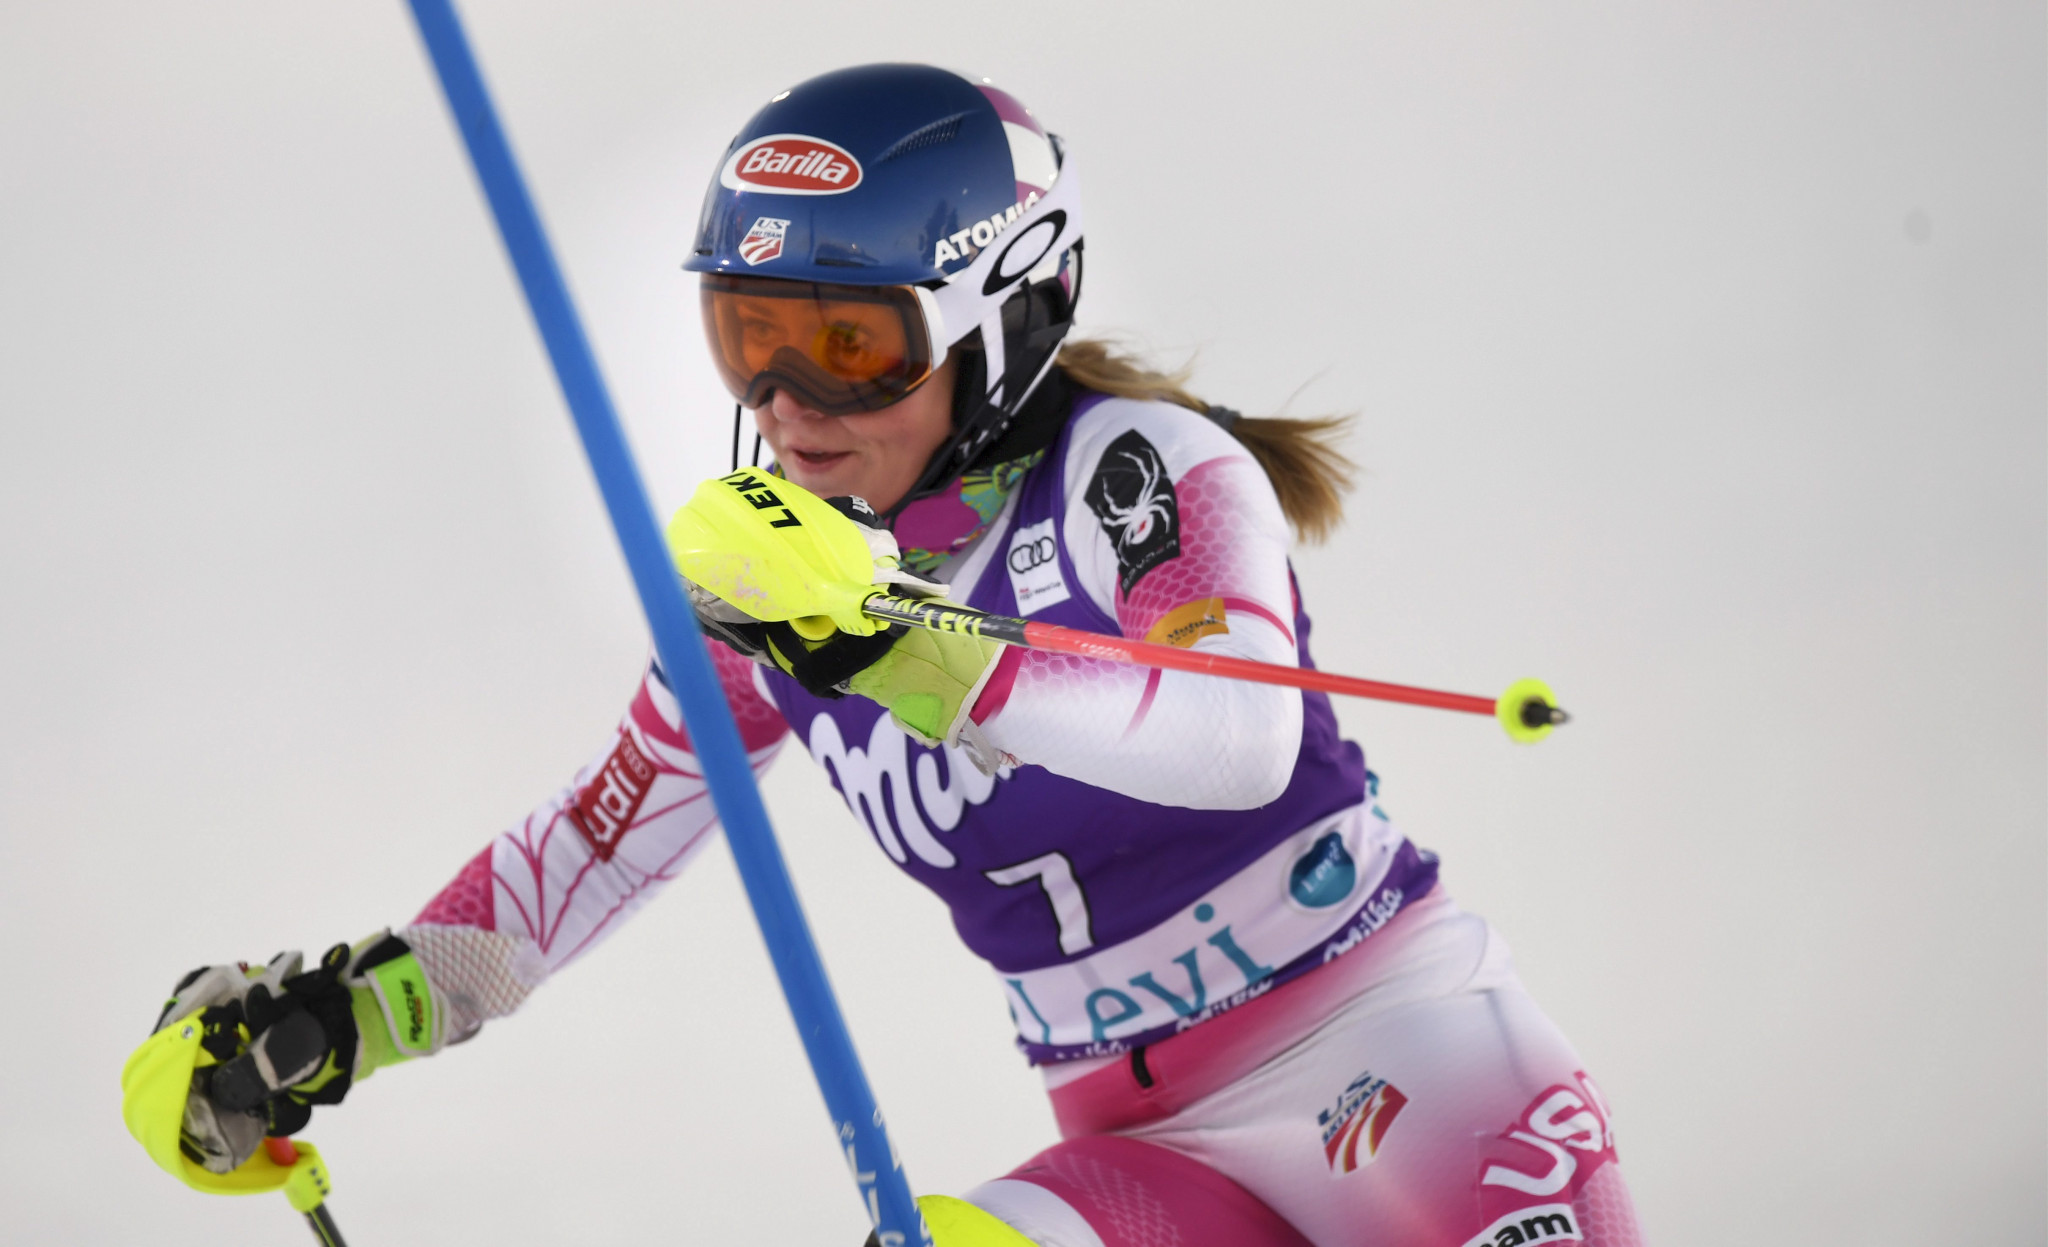 Mikaela Shiffrin won the women's slalom event last year in Levi ©Getty Images